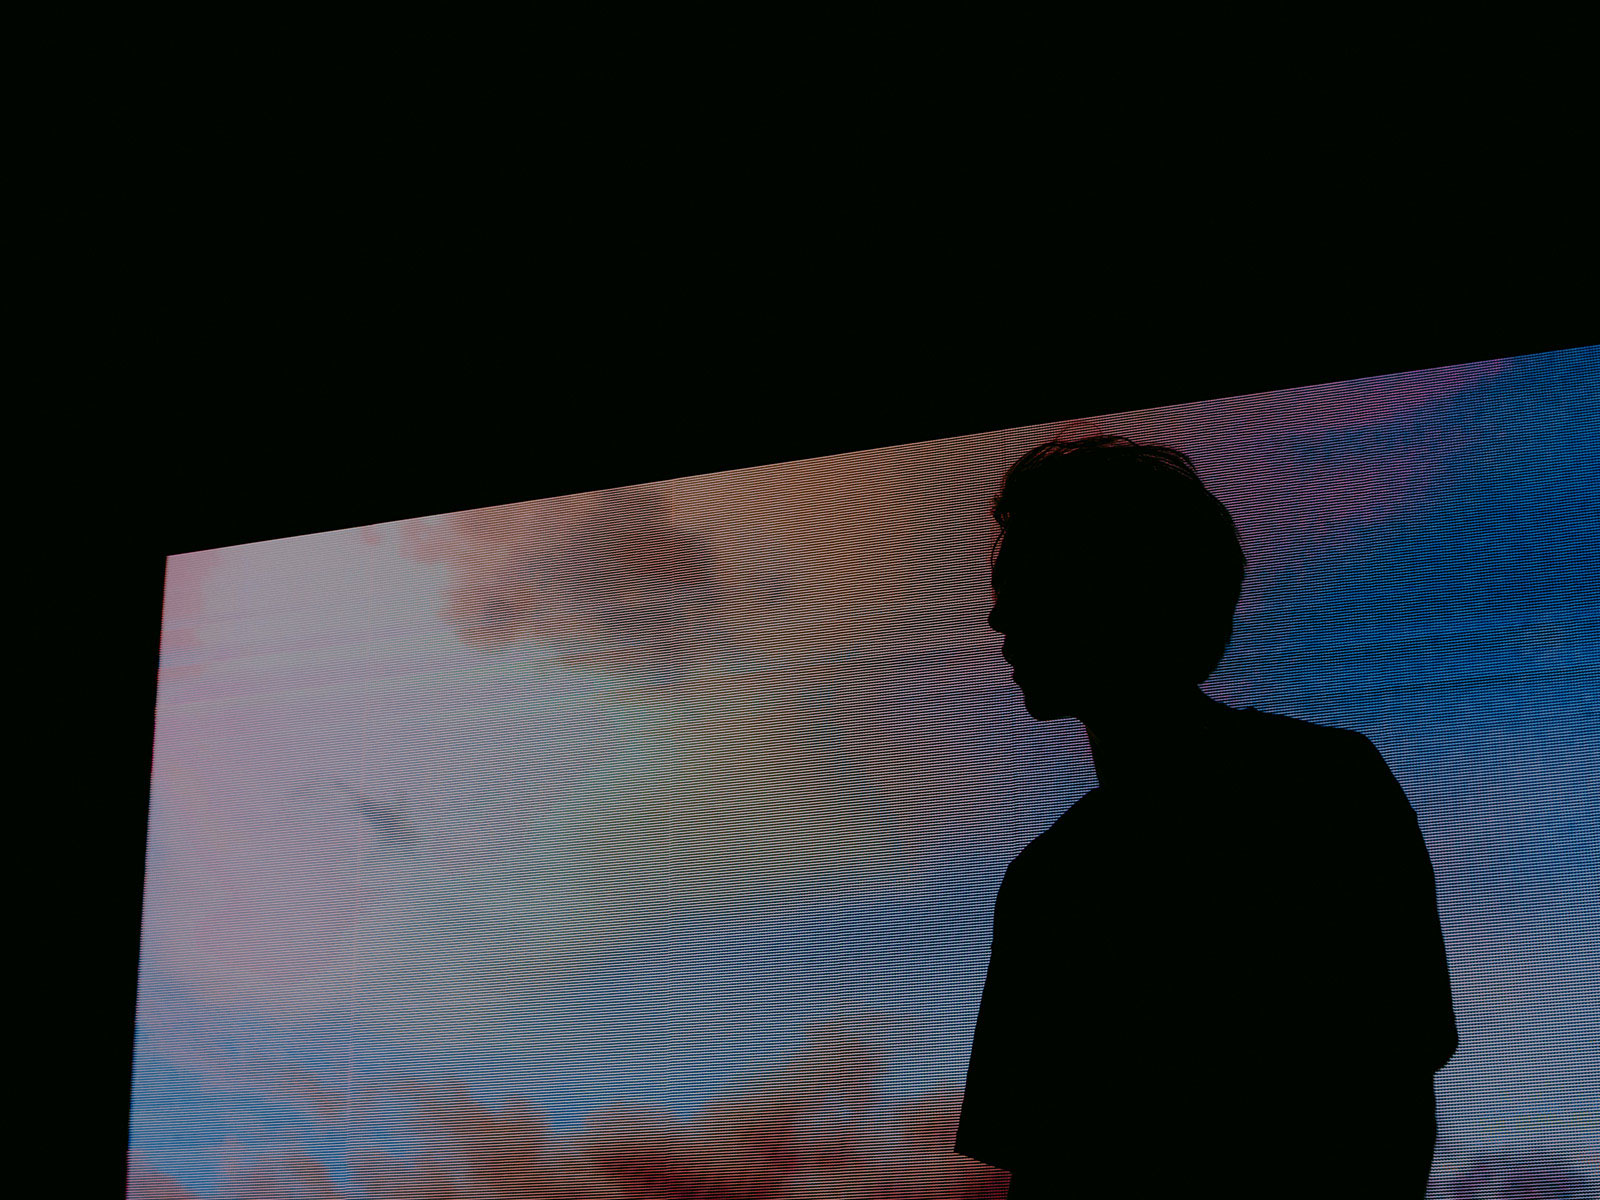 Sillouhette of young man against a large digital screen